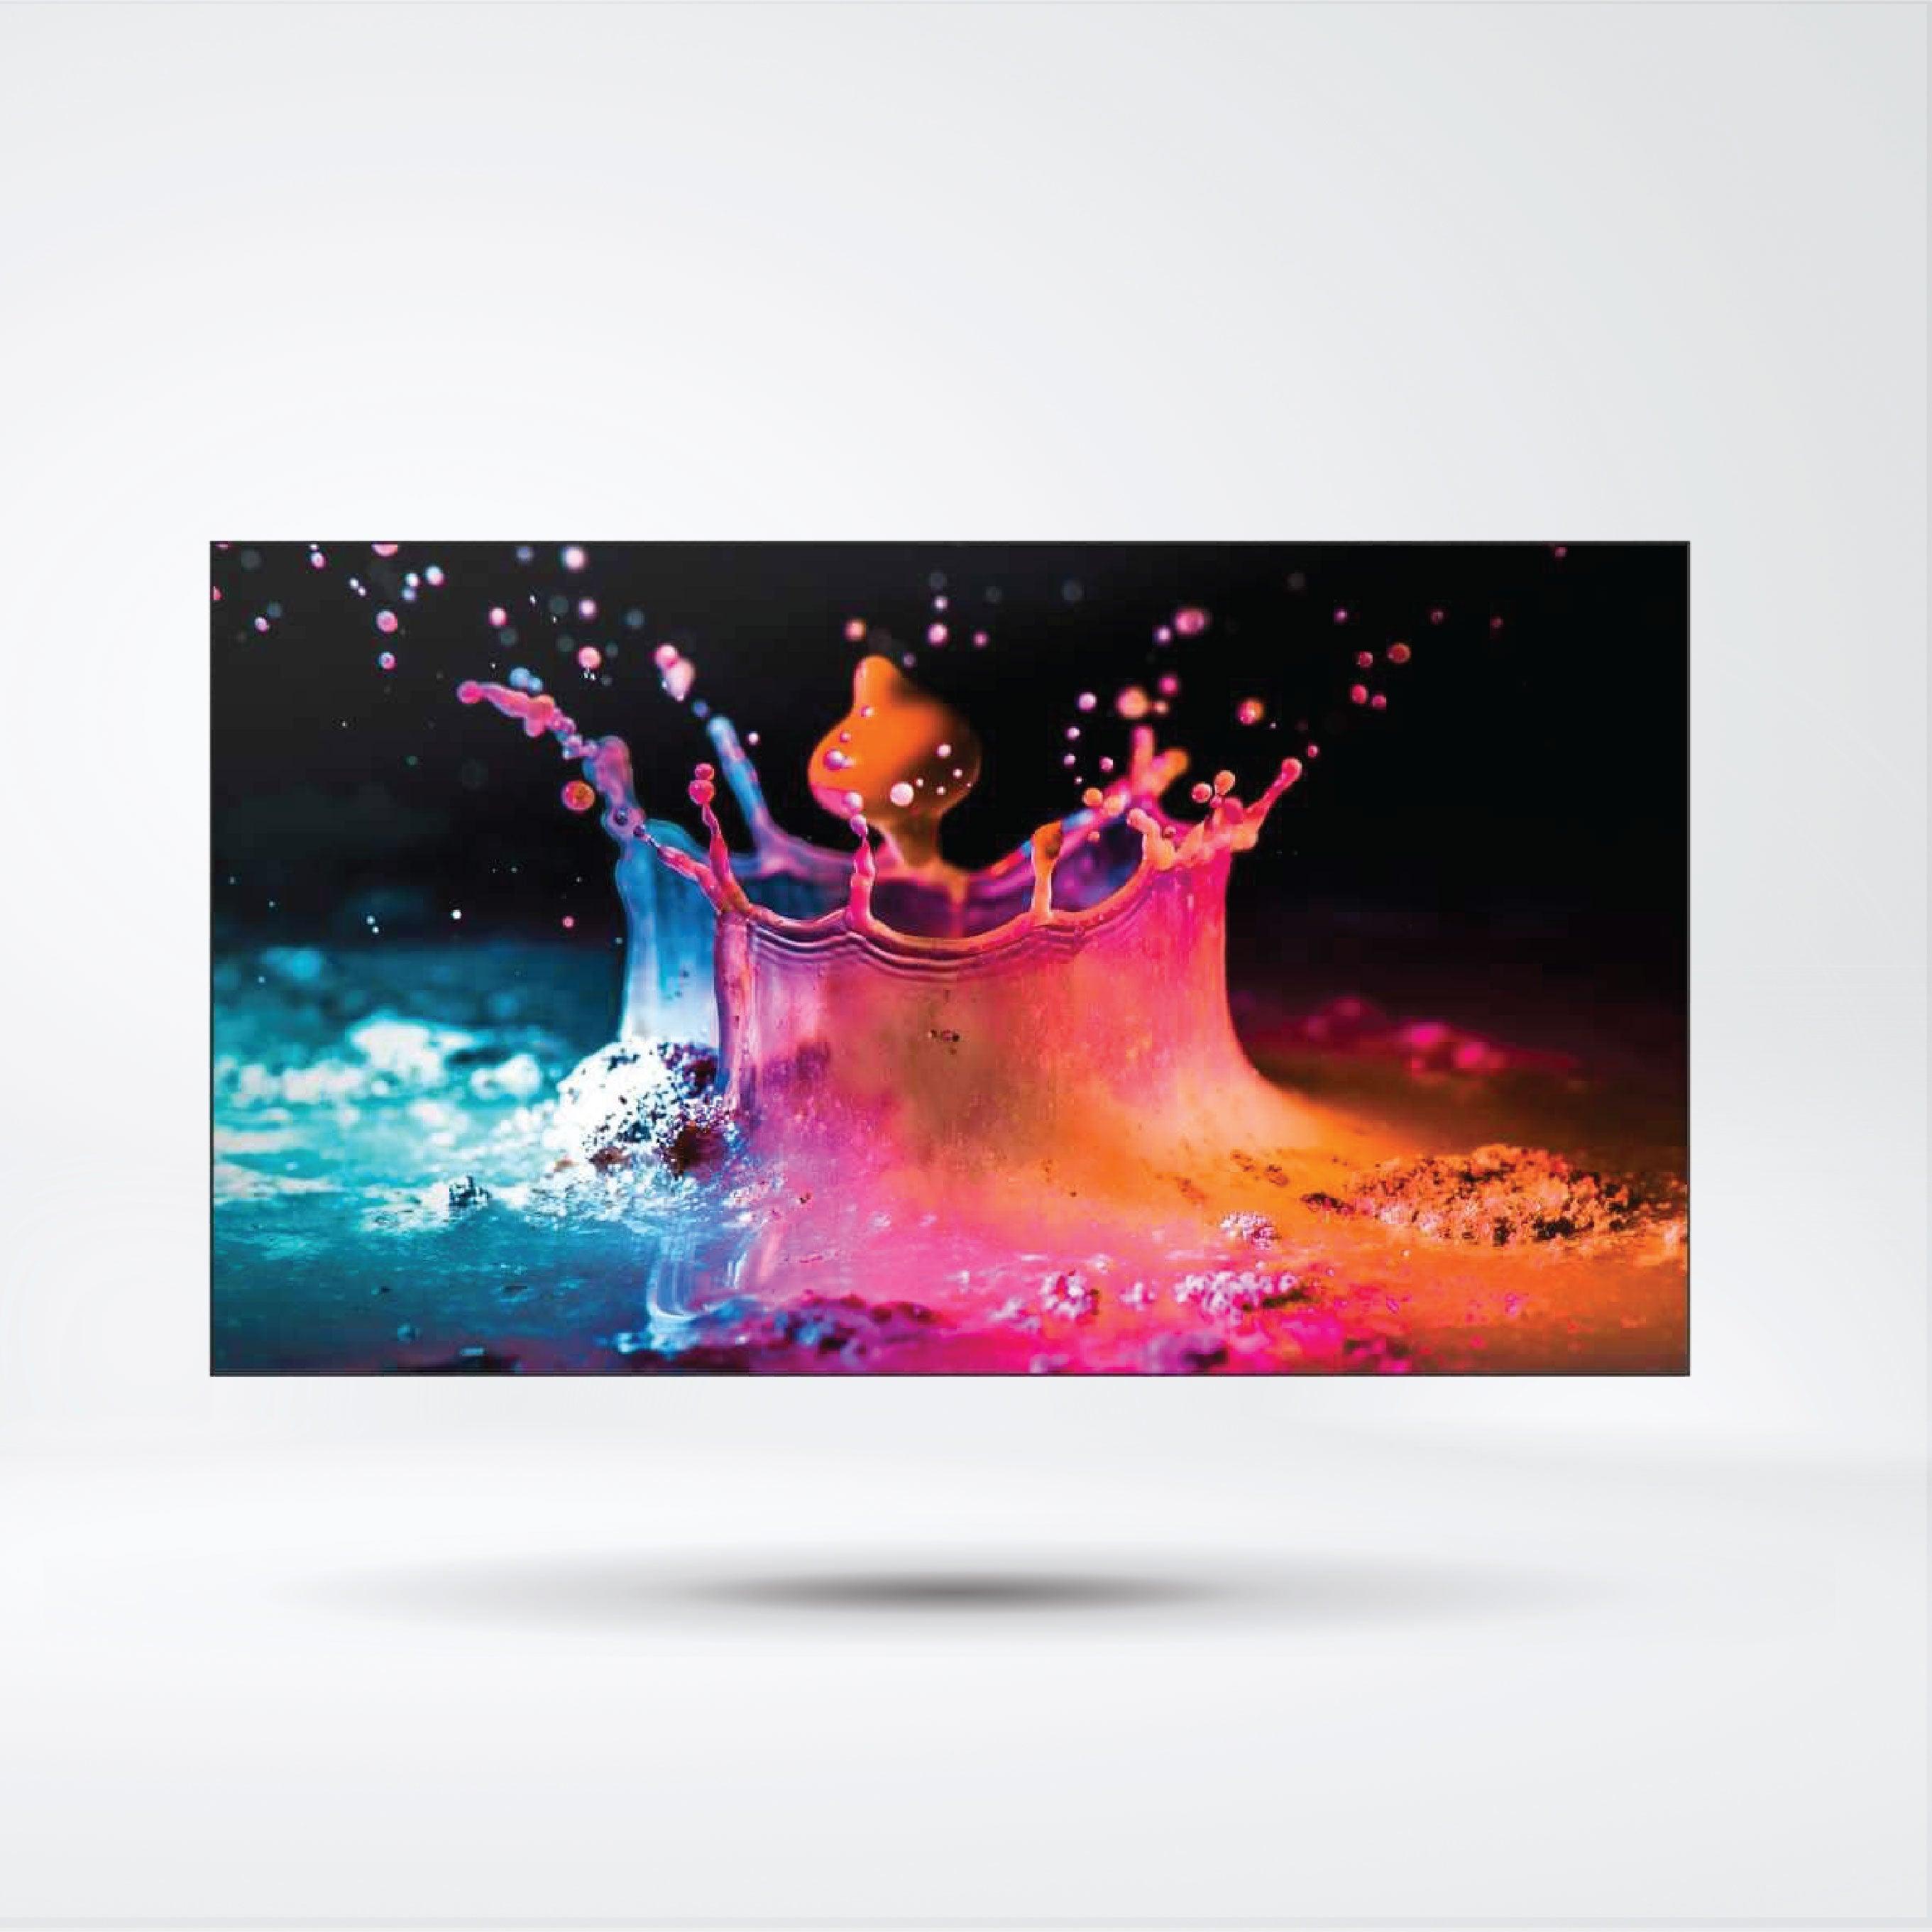 UD46E-A 46" 700 nit Draw consumers in with an immersive viewing experience - Riverplus